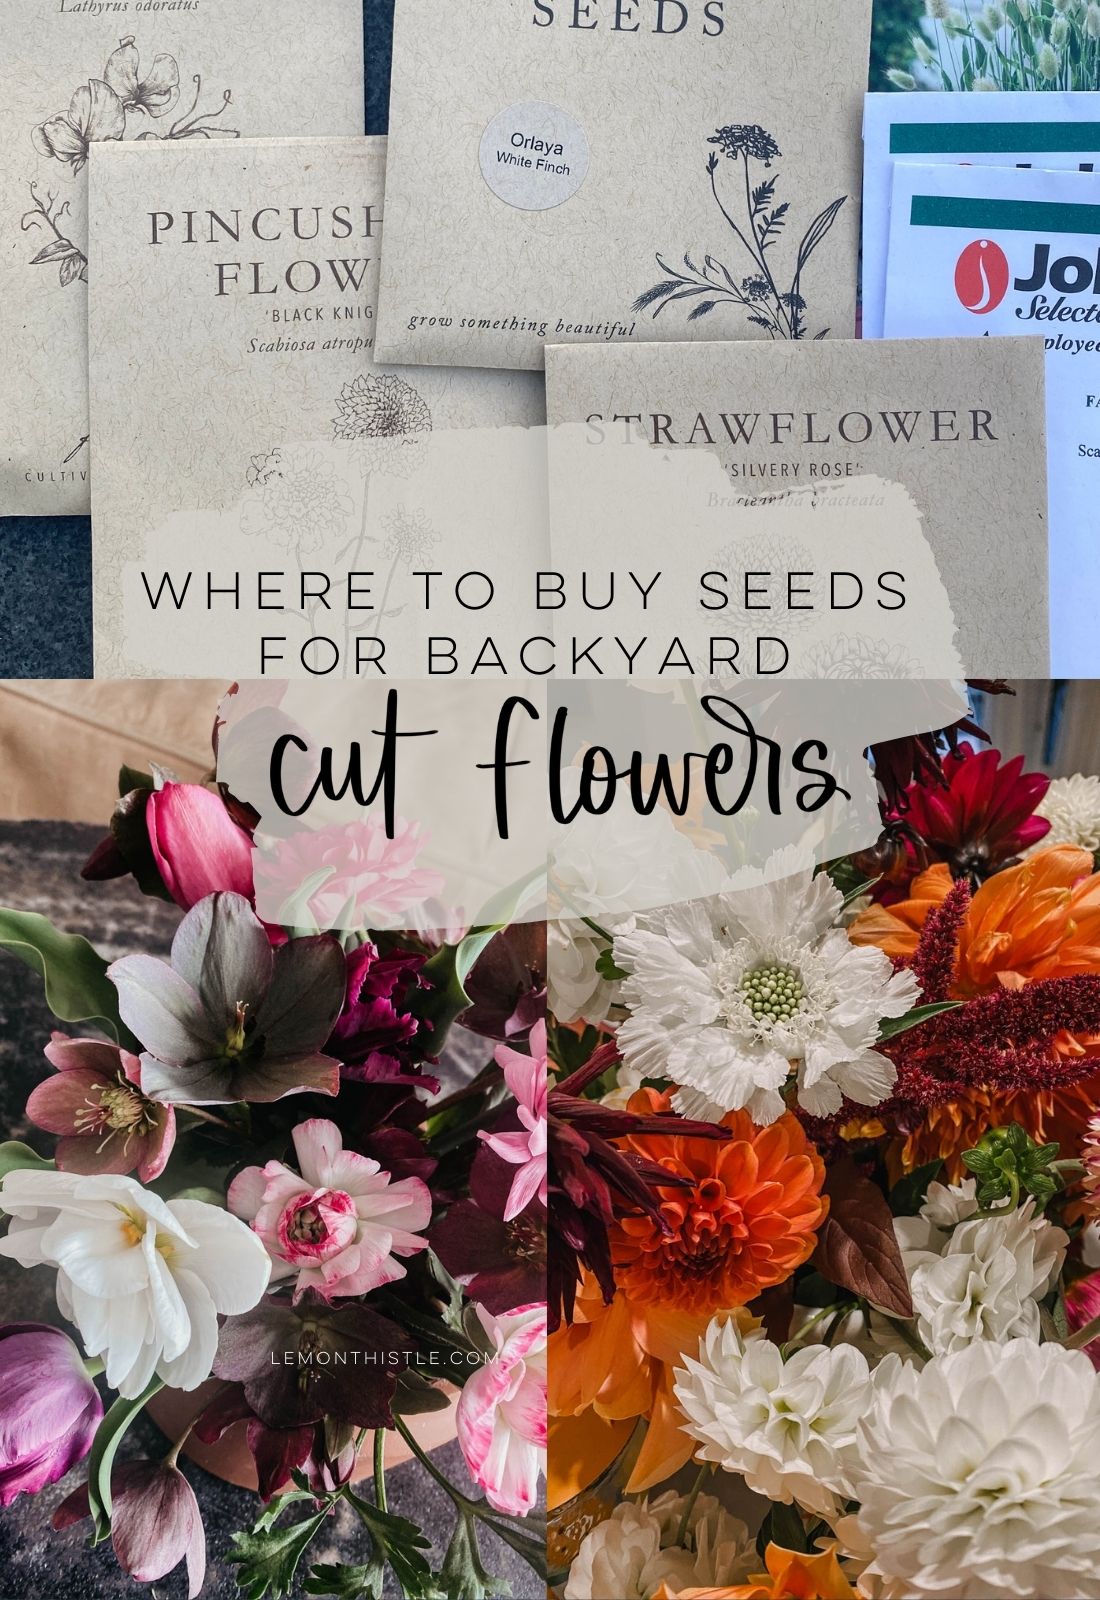 Where to buy seeds and bulbs for backyard cut flowers